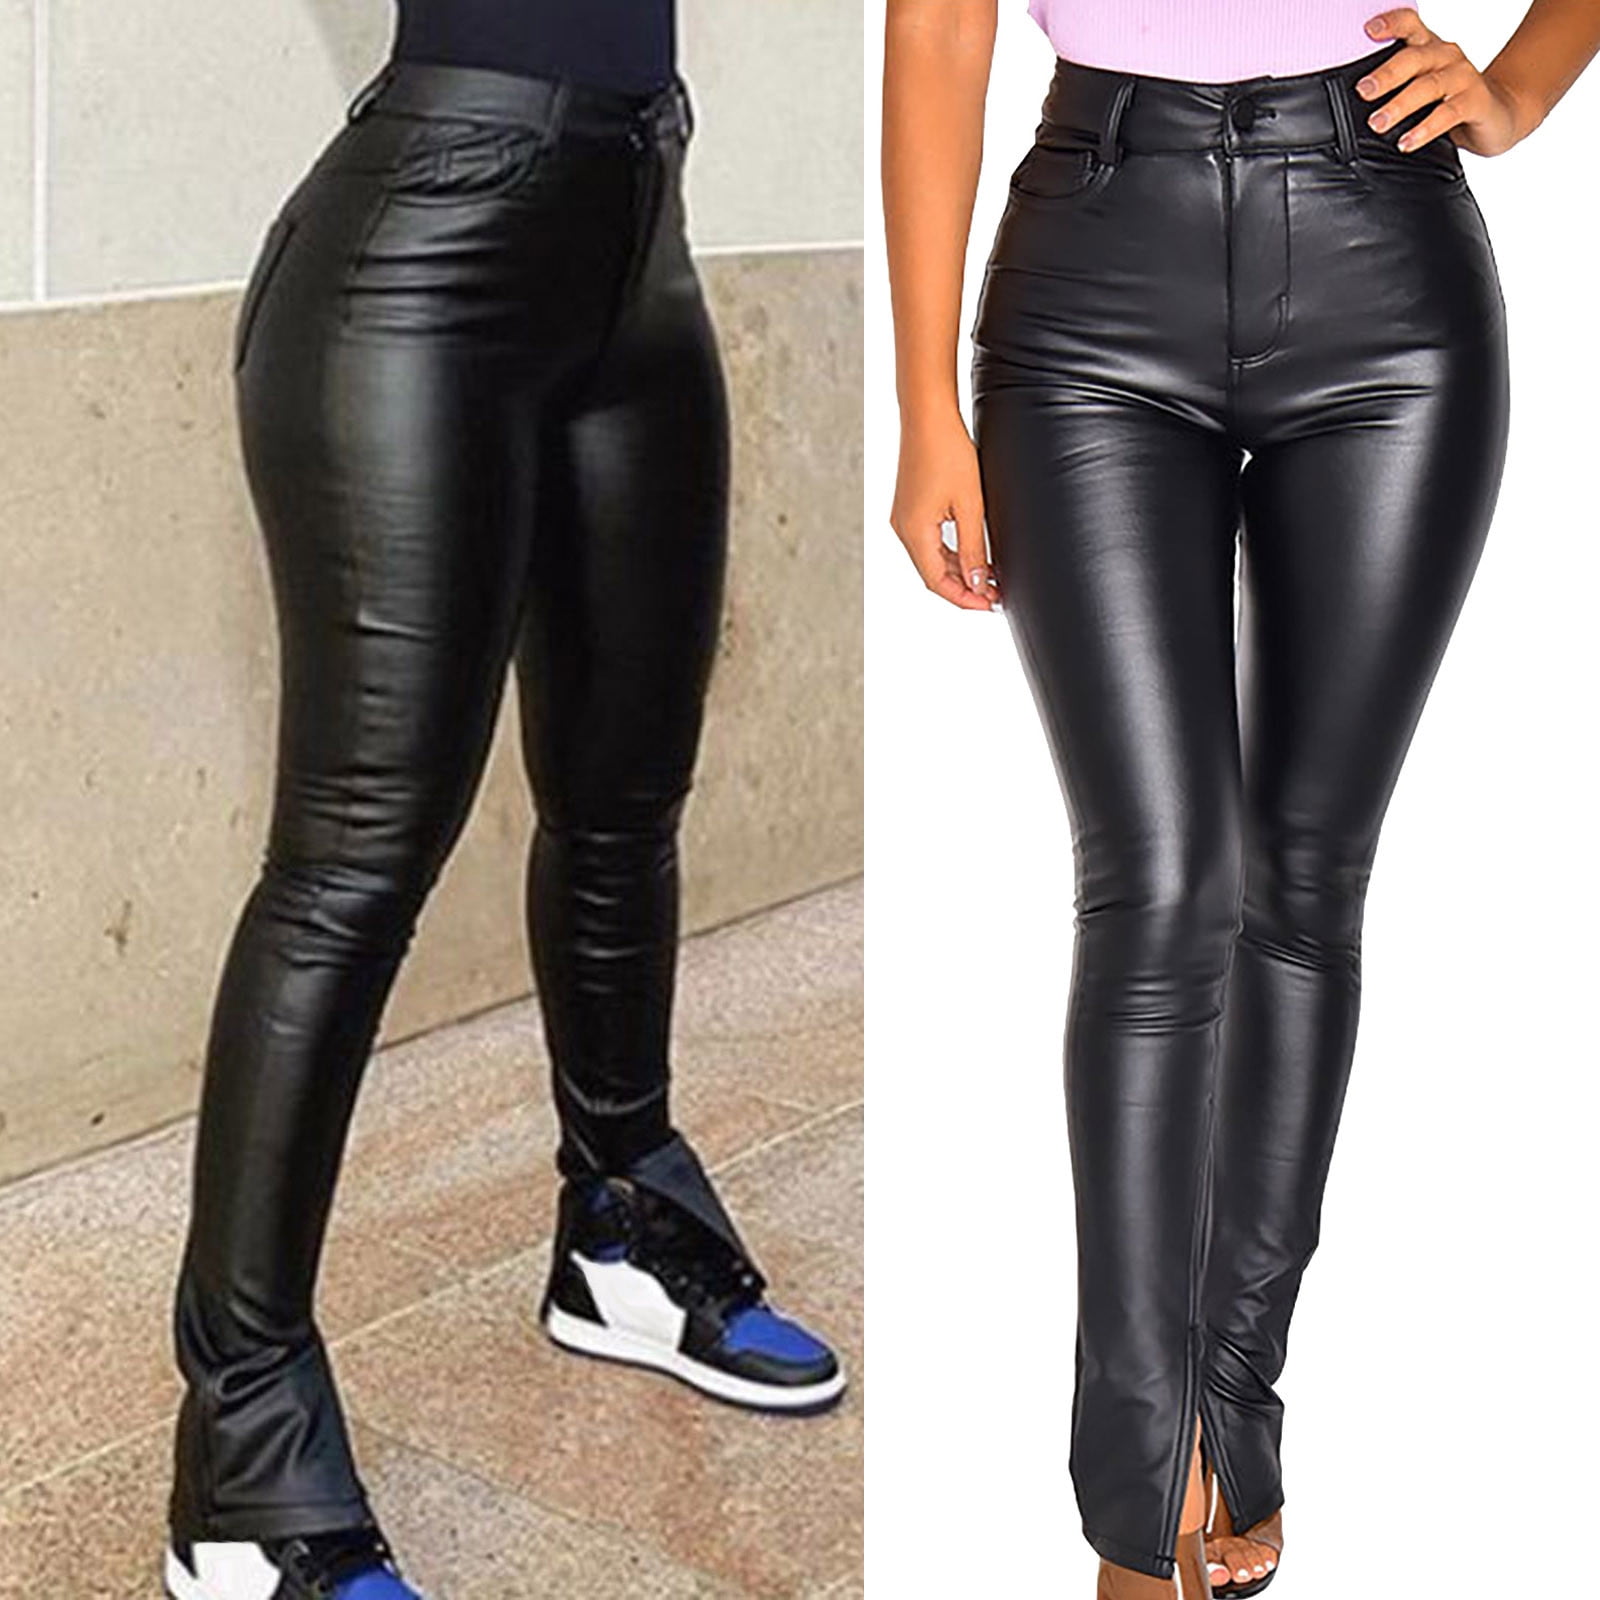 SELONE Leggings for Women Faux Leather Jumpsuits High Waist Casual